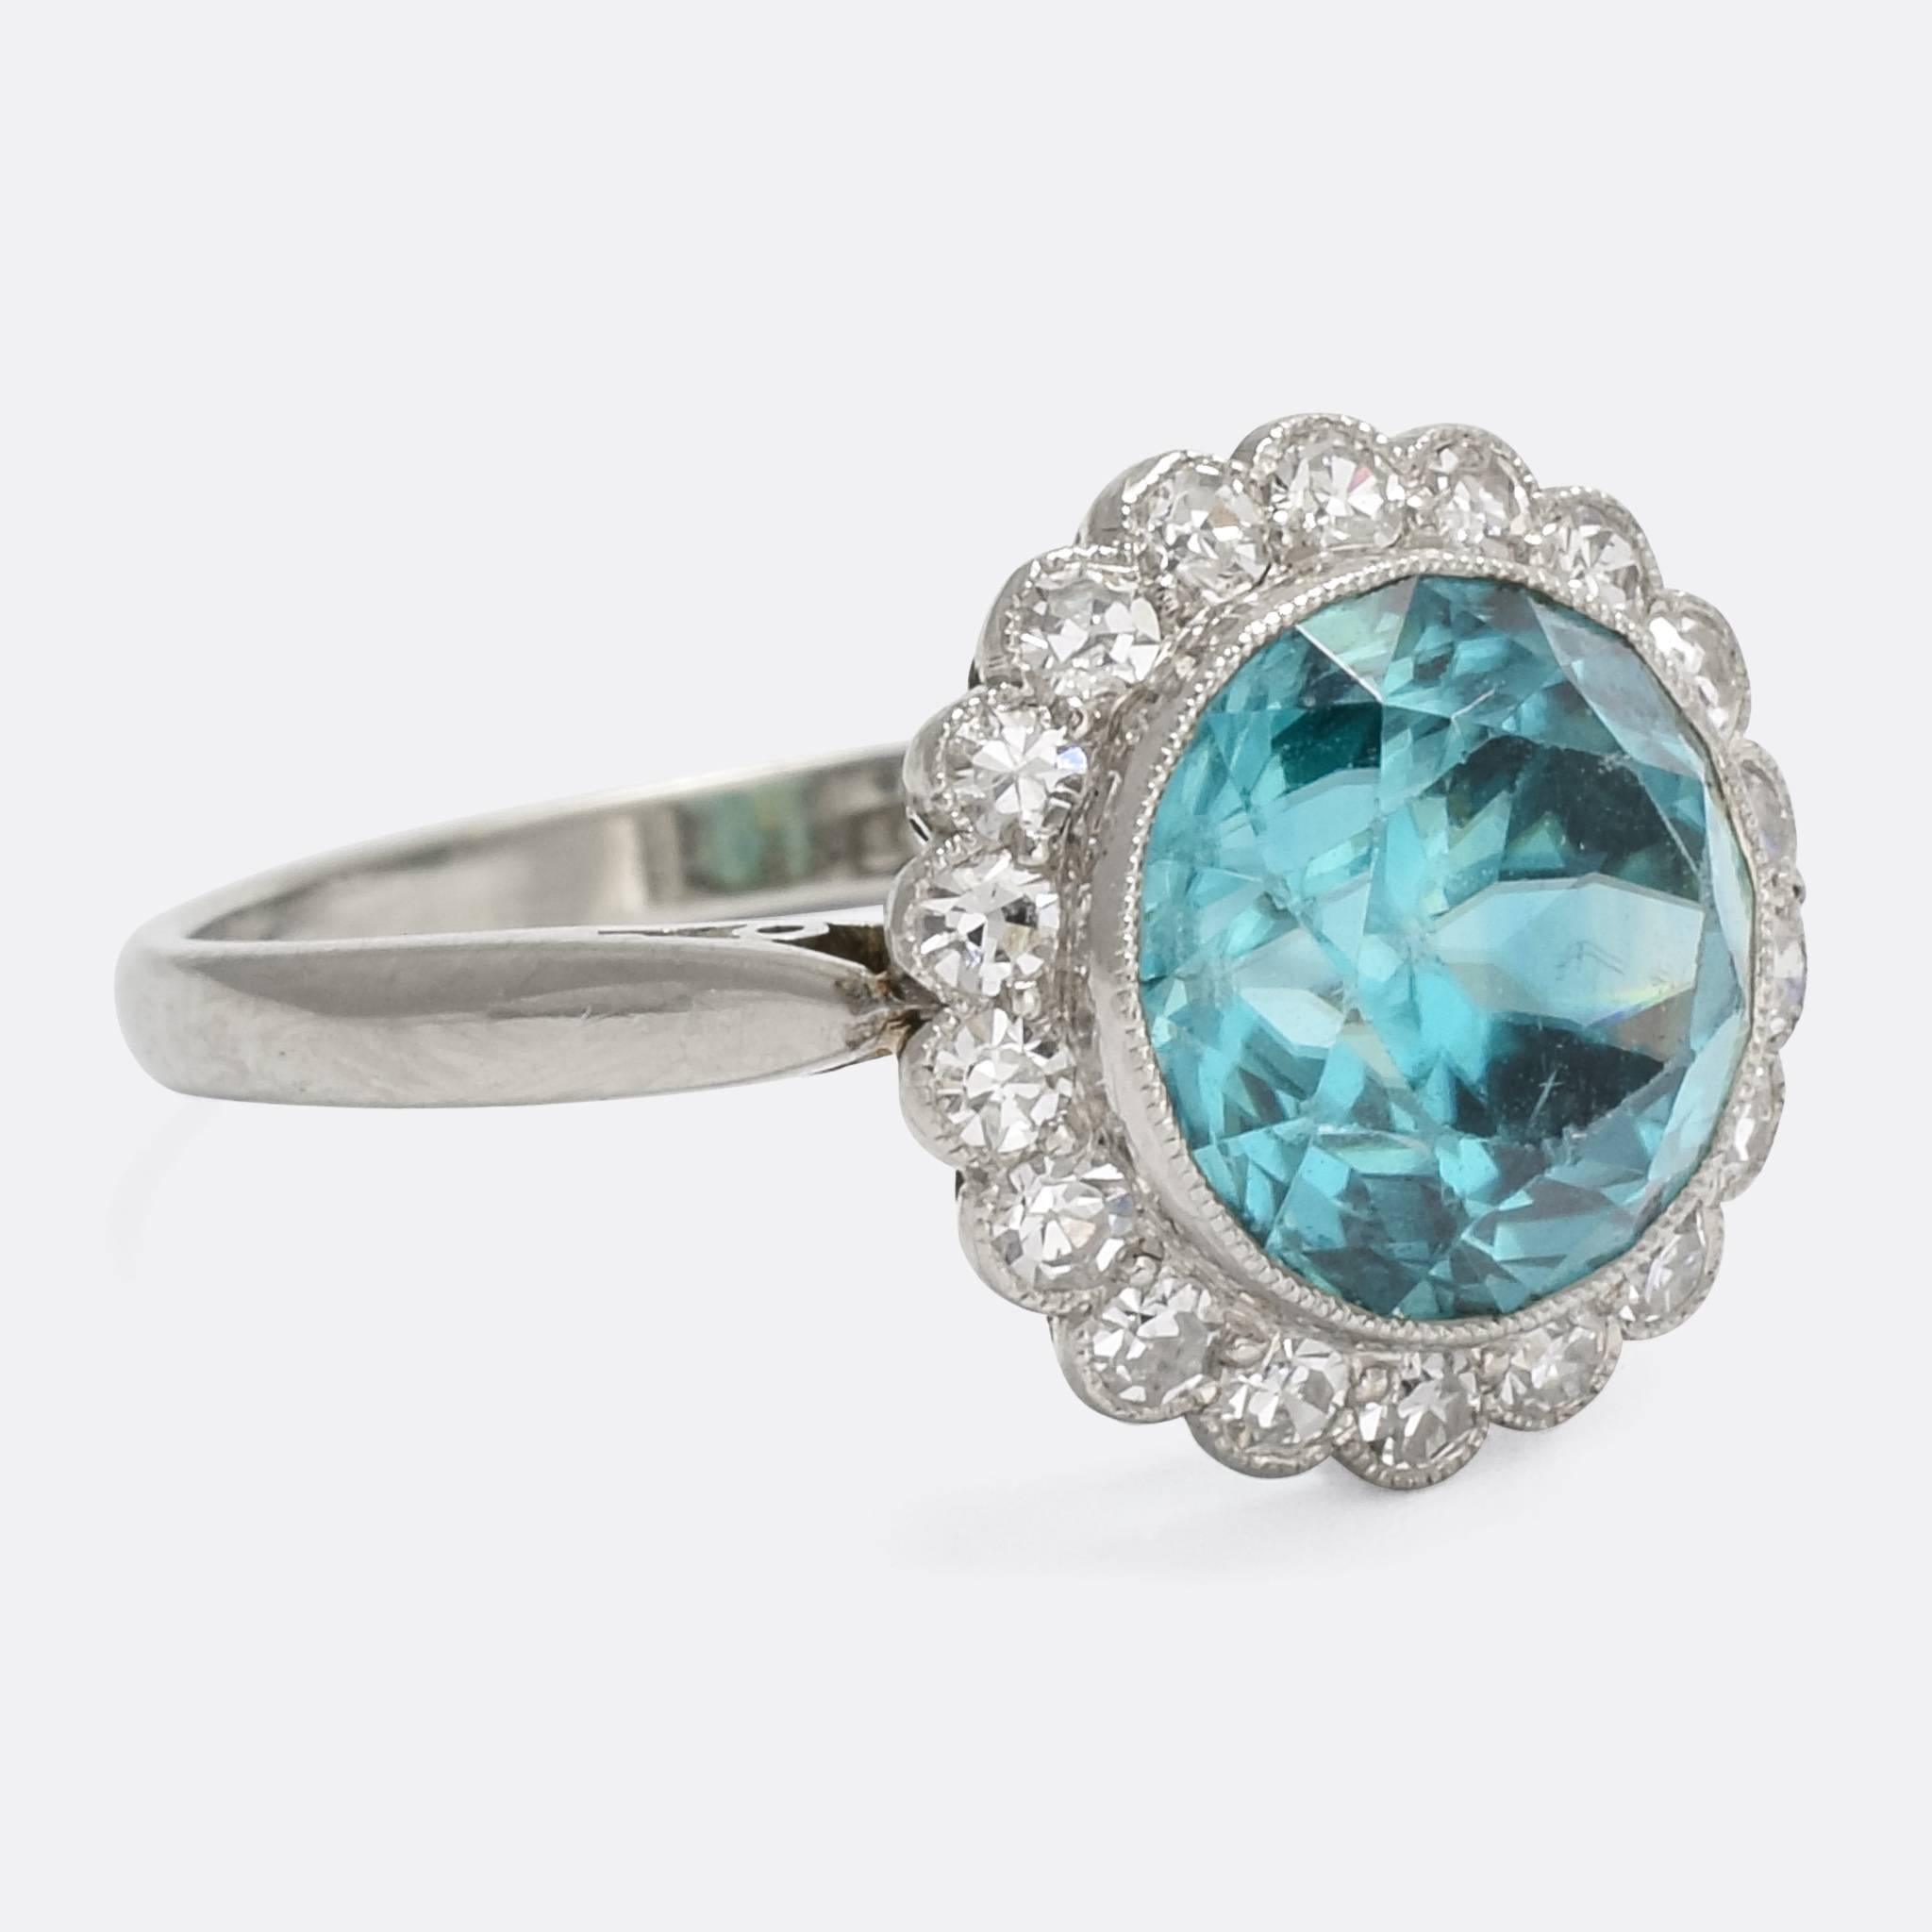 A particularly lovely antique flower cluster ring, set with a stunning blue Zircon within a halo of white Diamonds. The stones rest in fine millegrain platinum settings, with each diamond set in its own individual 